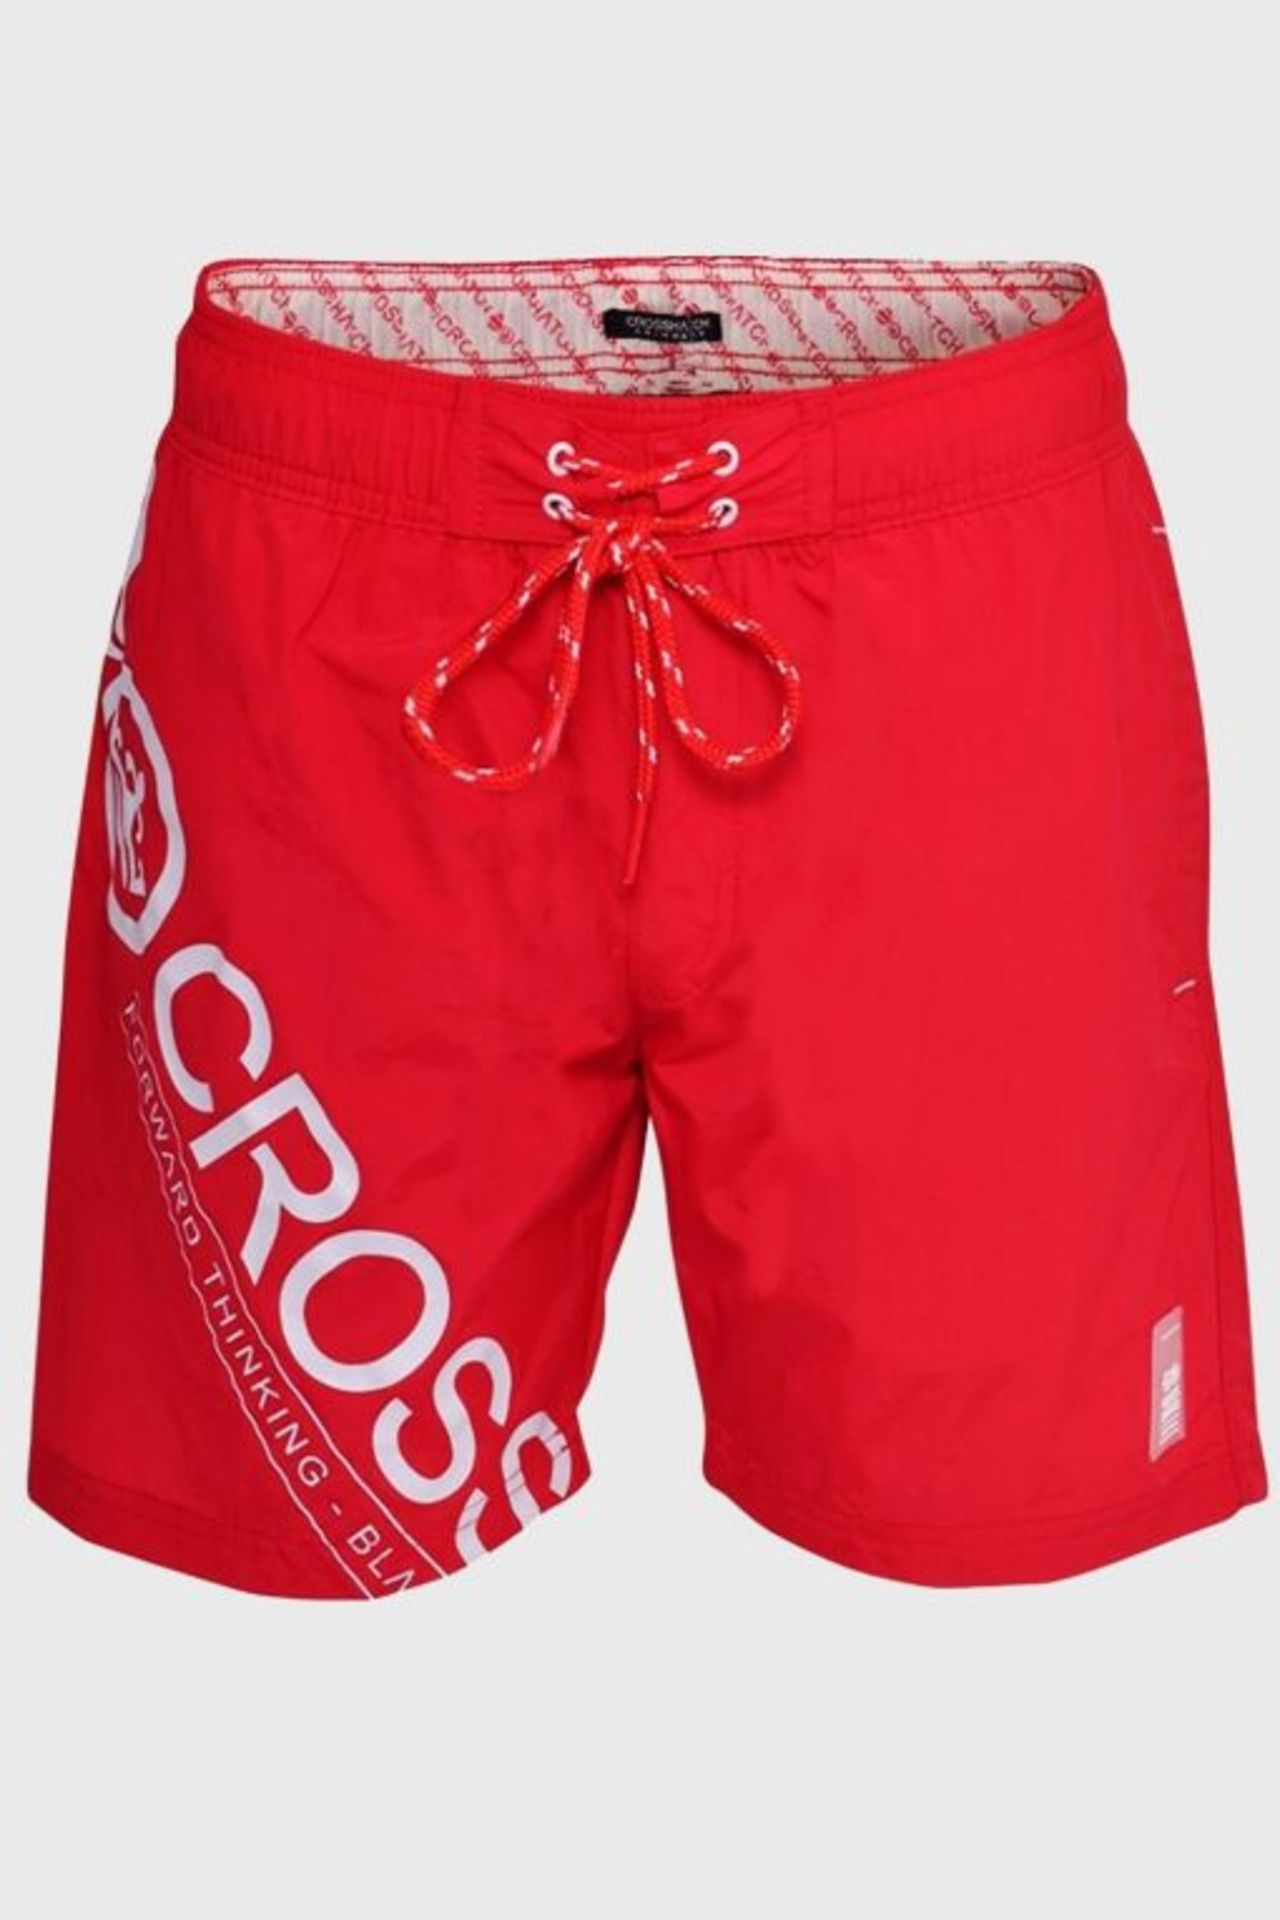 10 X BRAND NEW MEN'S PACIFIC CROSS HATCH SWIM SHORTS IN RED SIZE XL , RRP £19.99 TOTAL £199.9